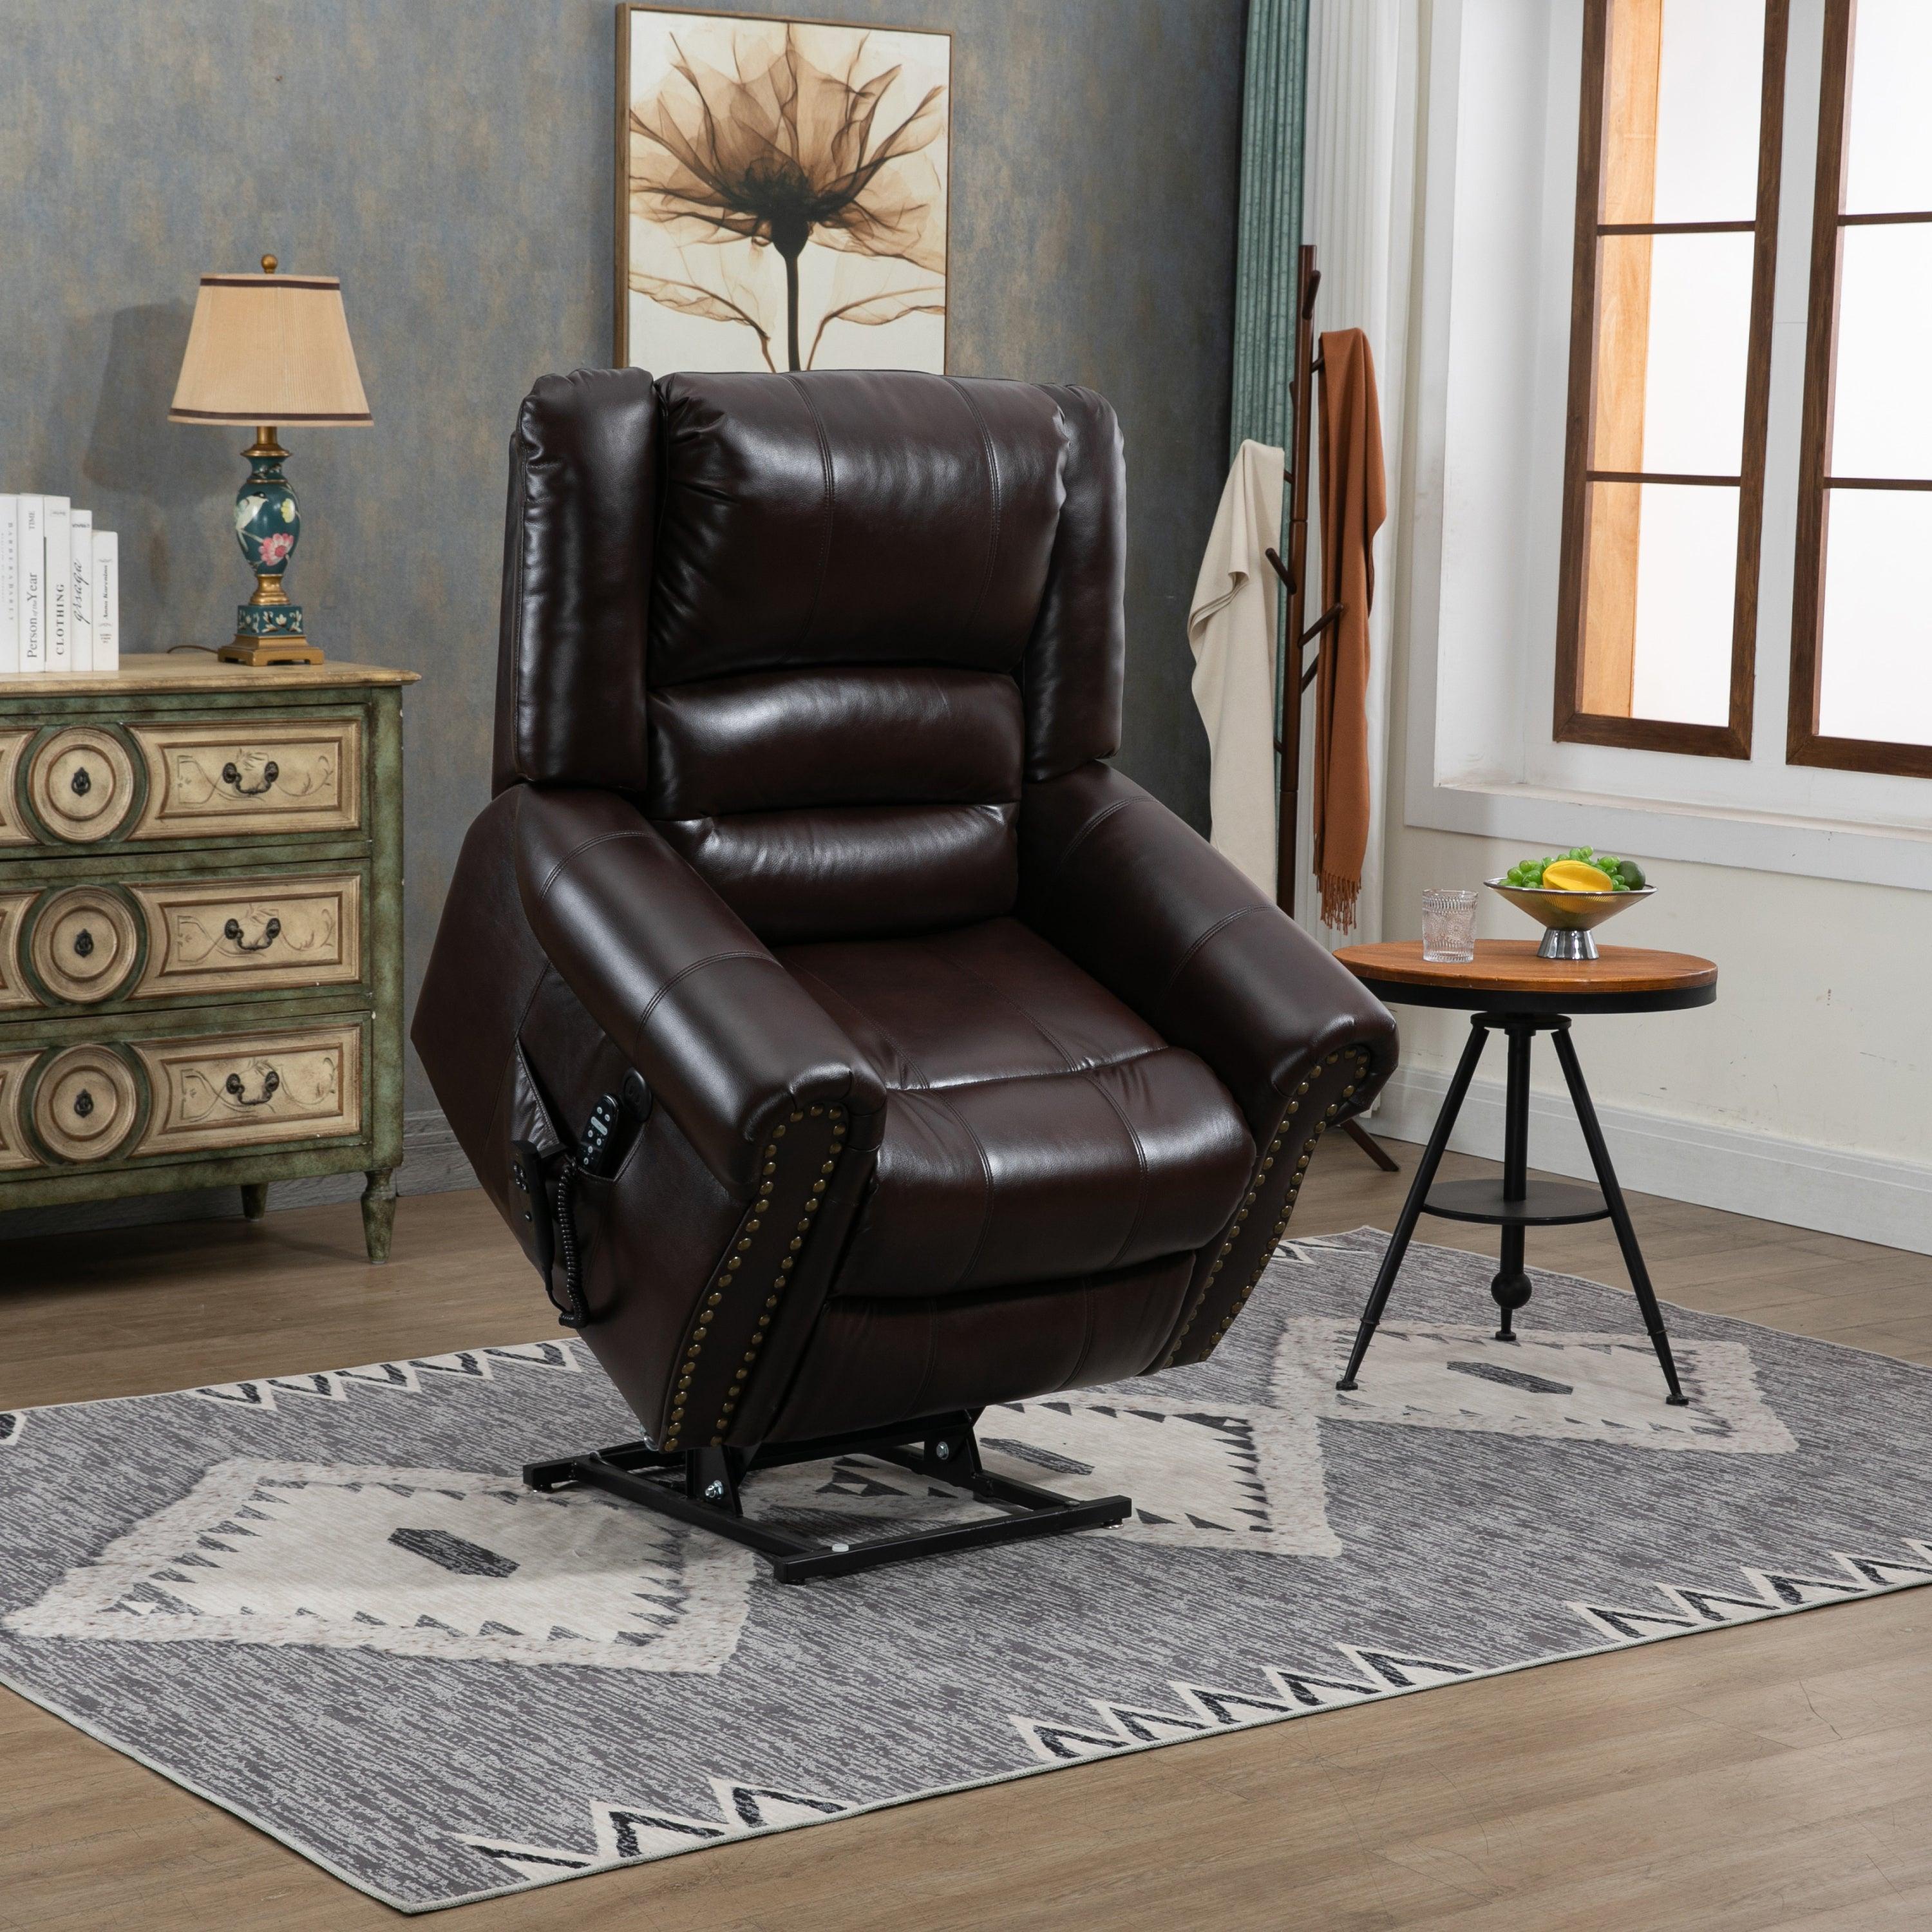 🆓🚛 Power Lift Recliner Chair Heat Massage Dual Motor Infinite Position Up To 350 Lbs, Faux Leather, Heavy Duty Motion Mechanism With Usb Ports, Brown